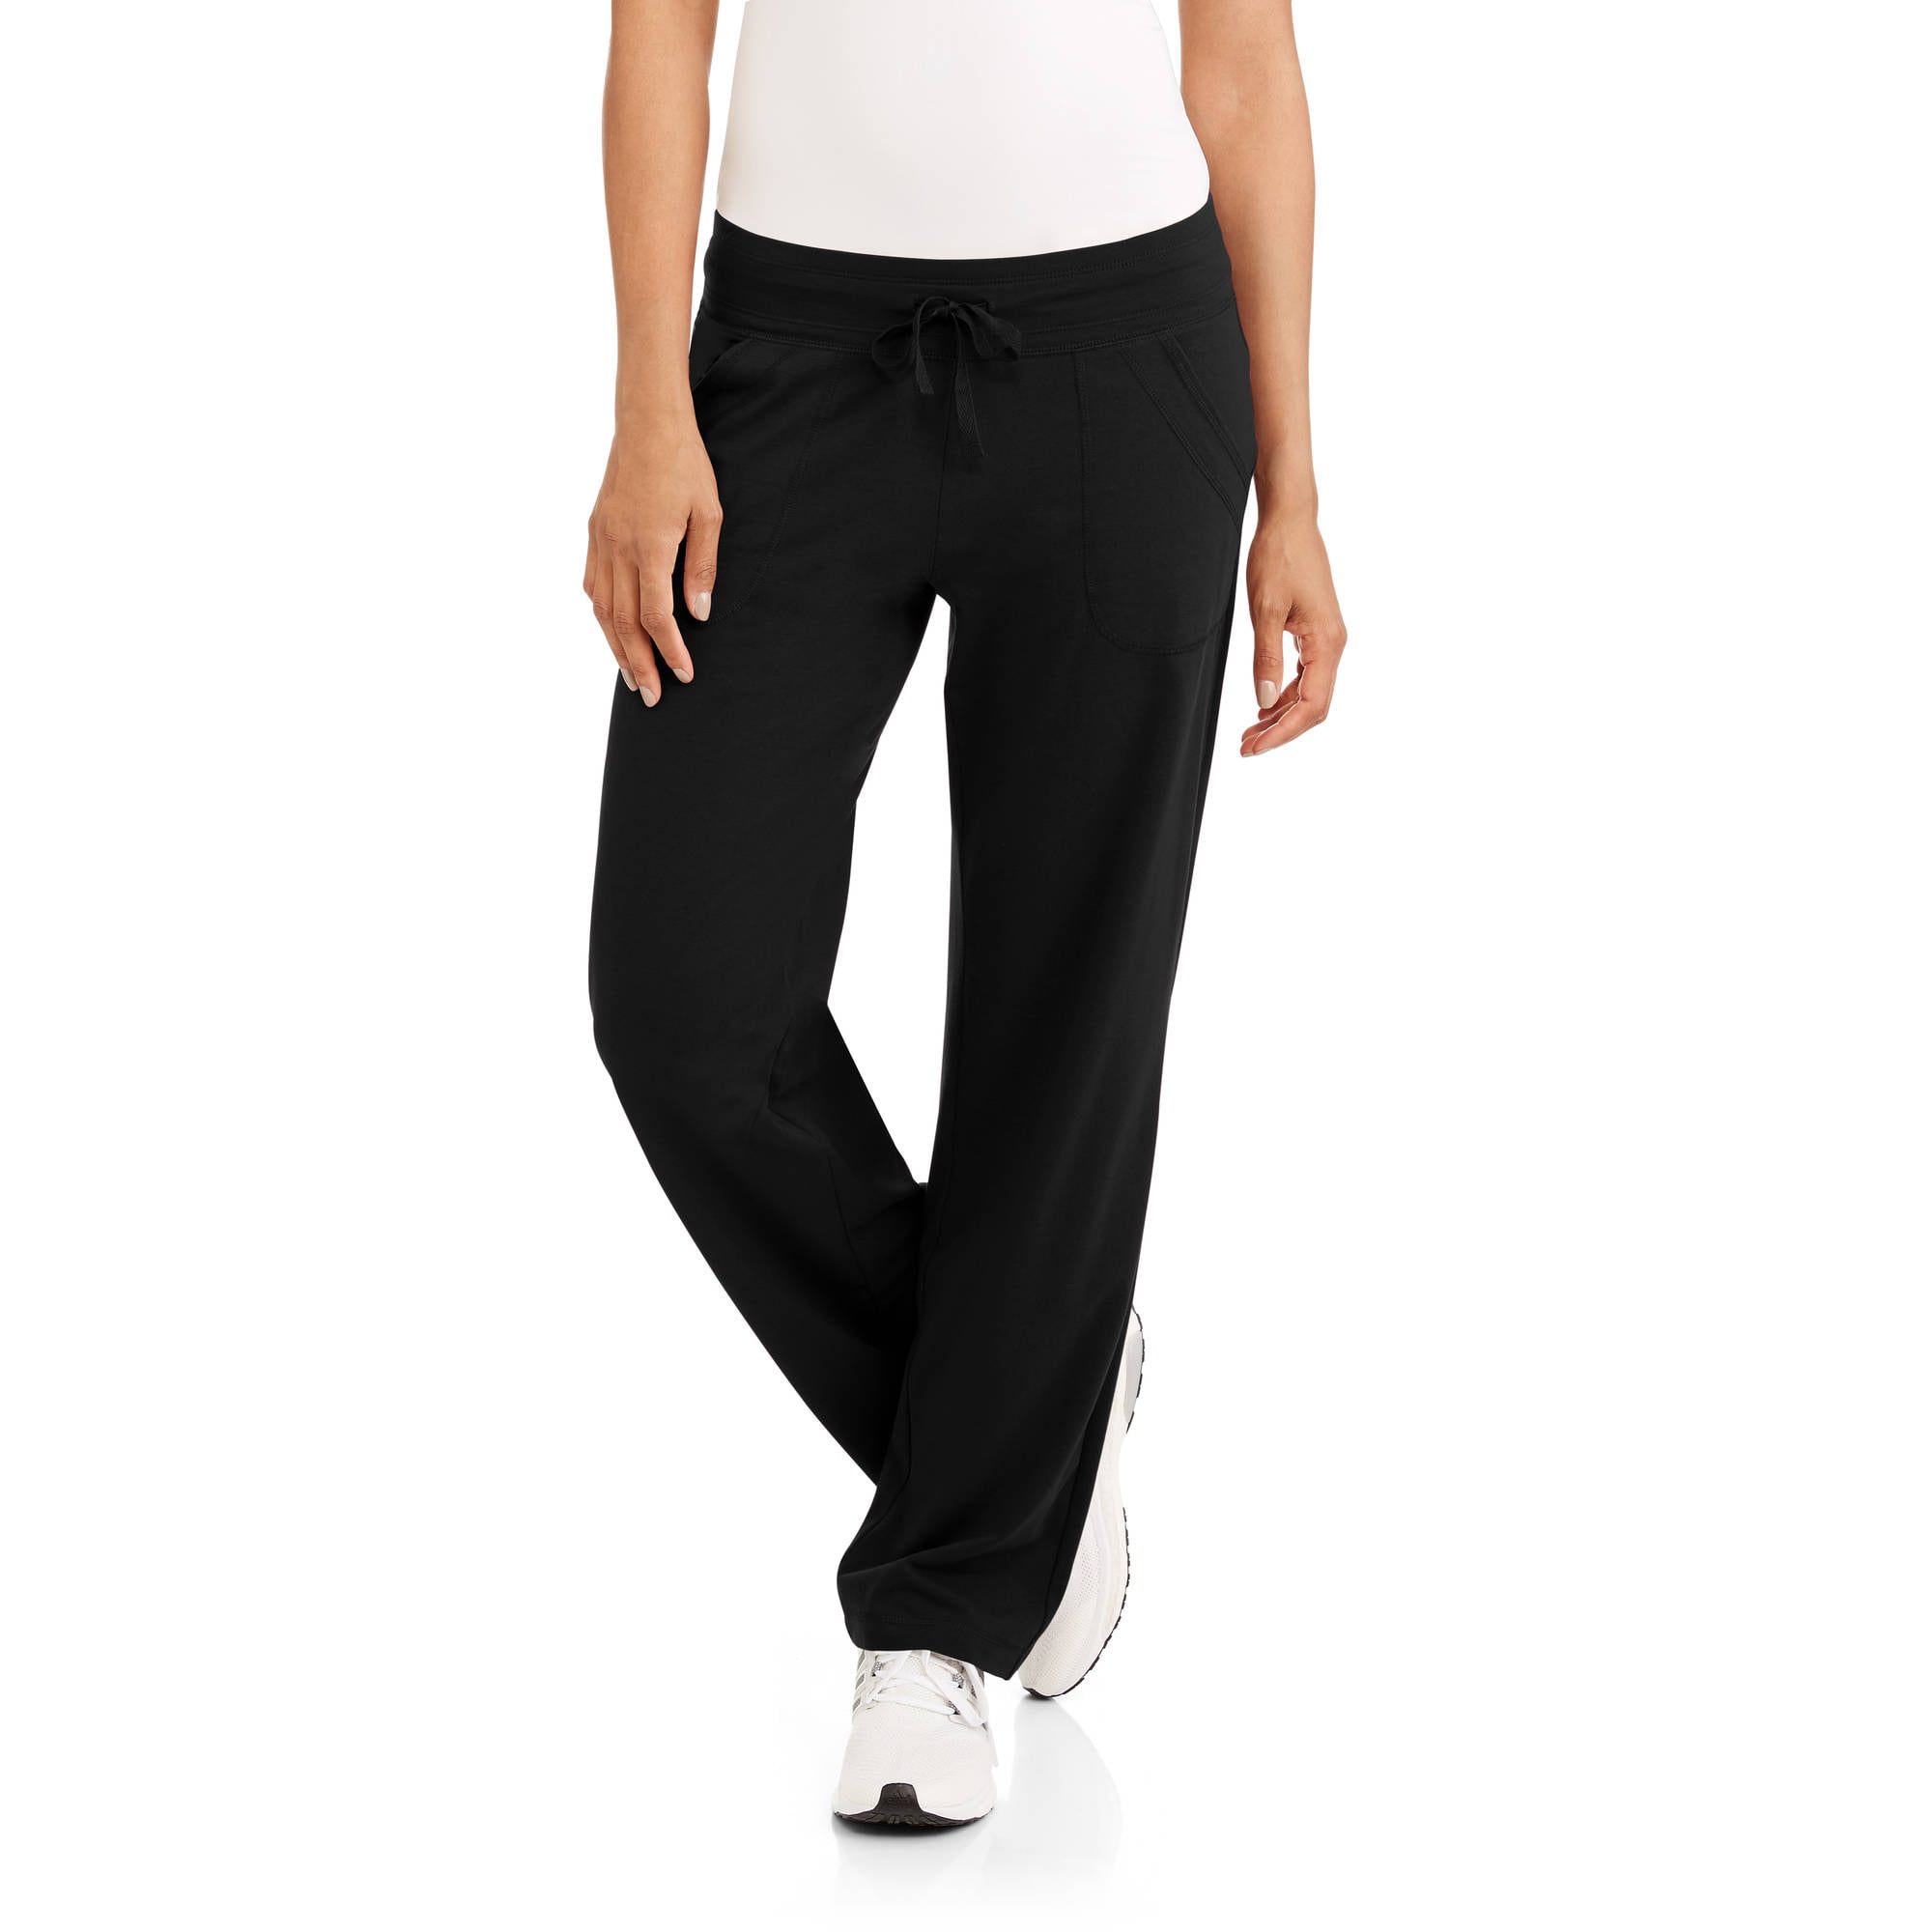 Athletic Works Women's Regular Dri-More Core Relaxed Fit, 47% OFF